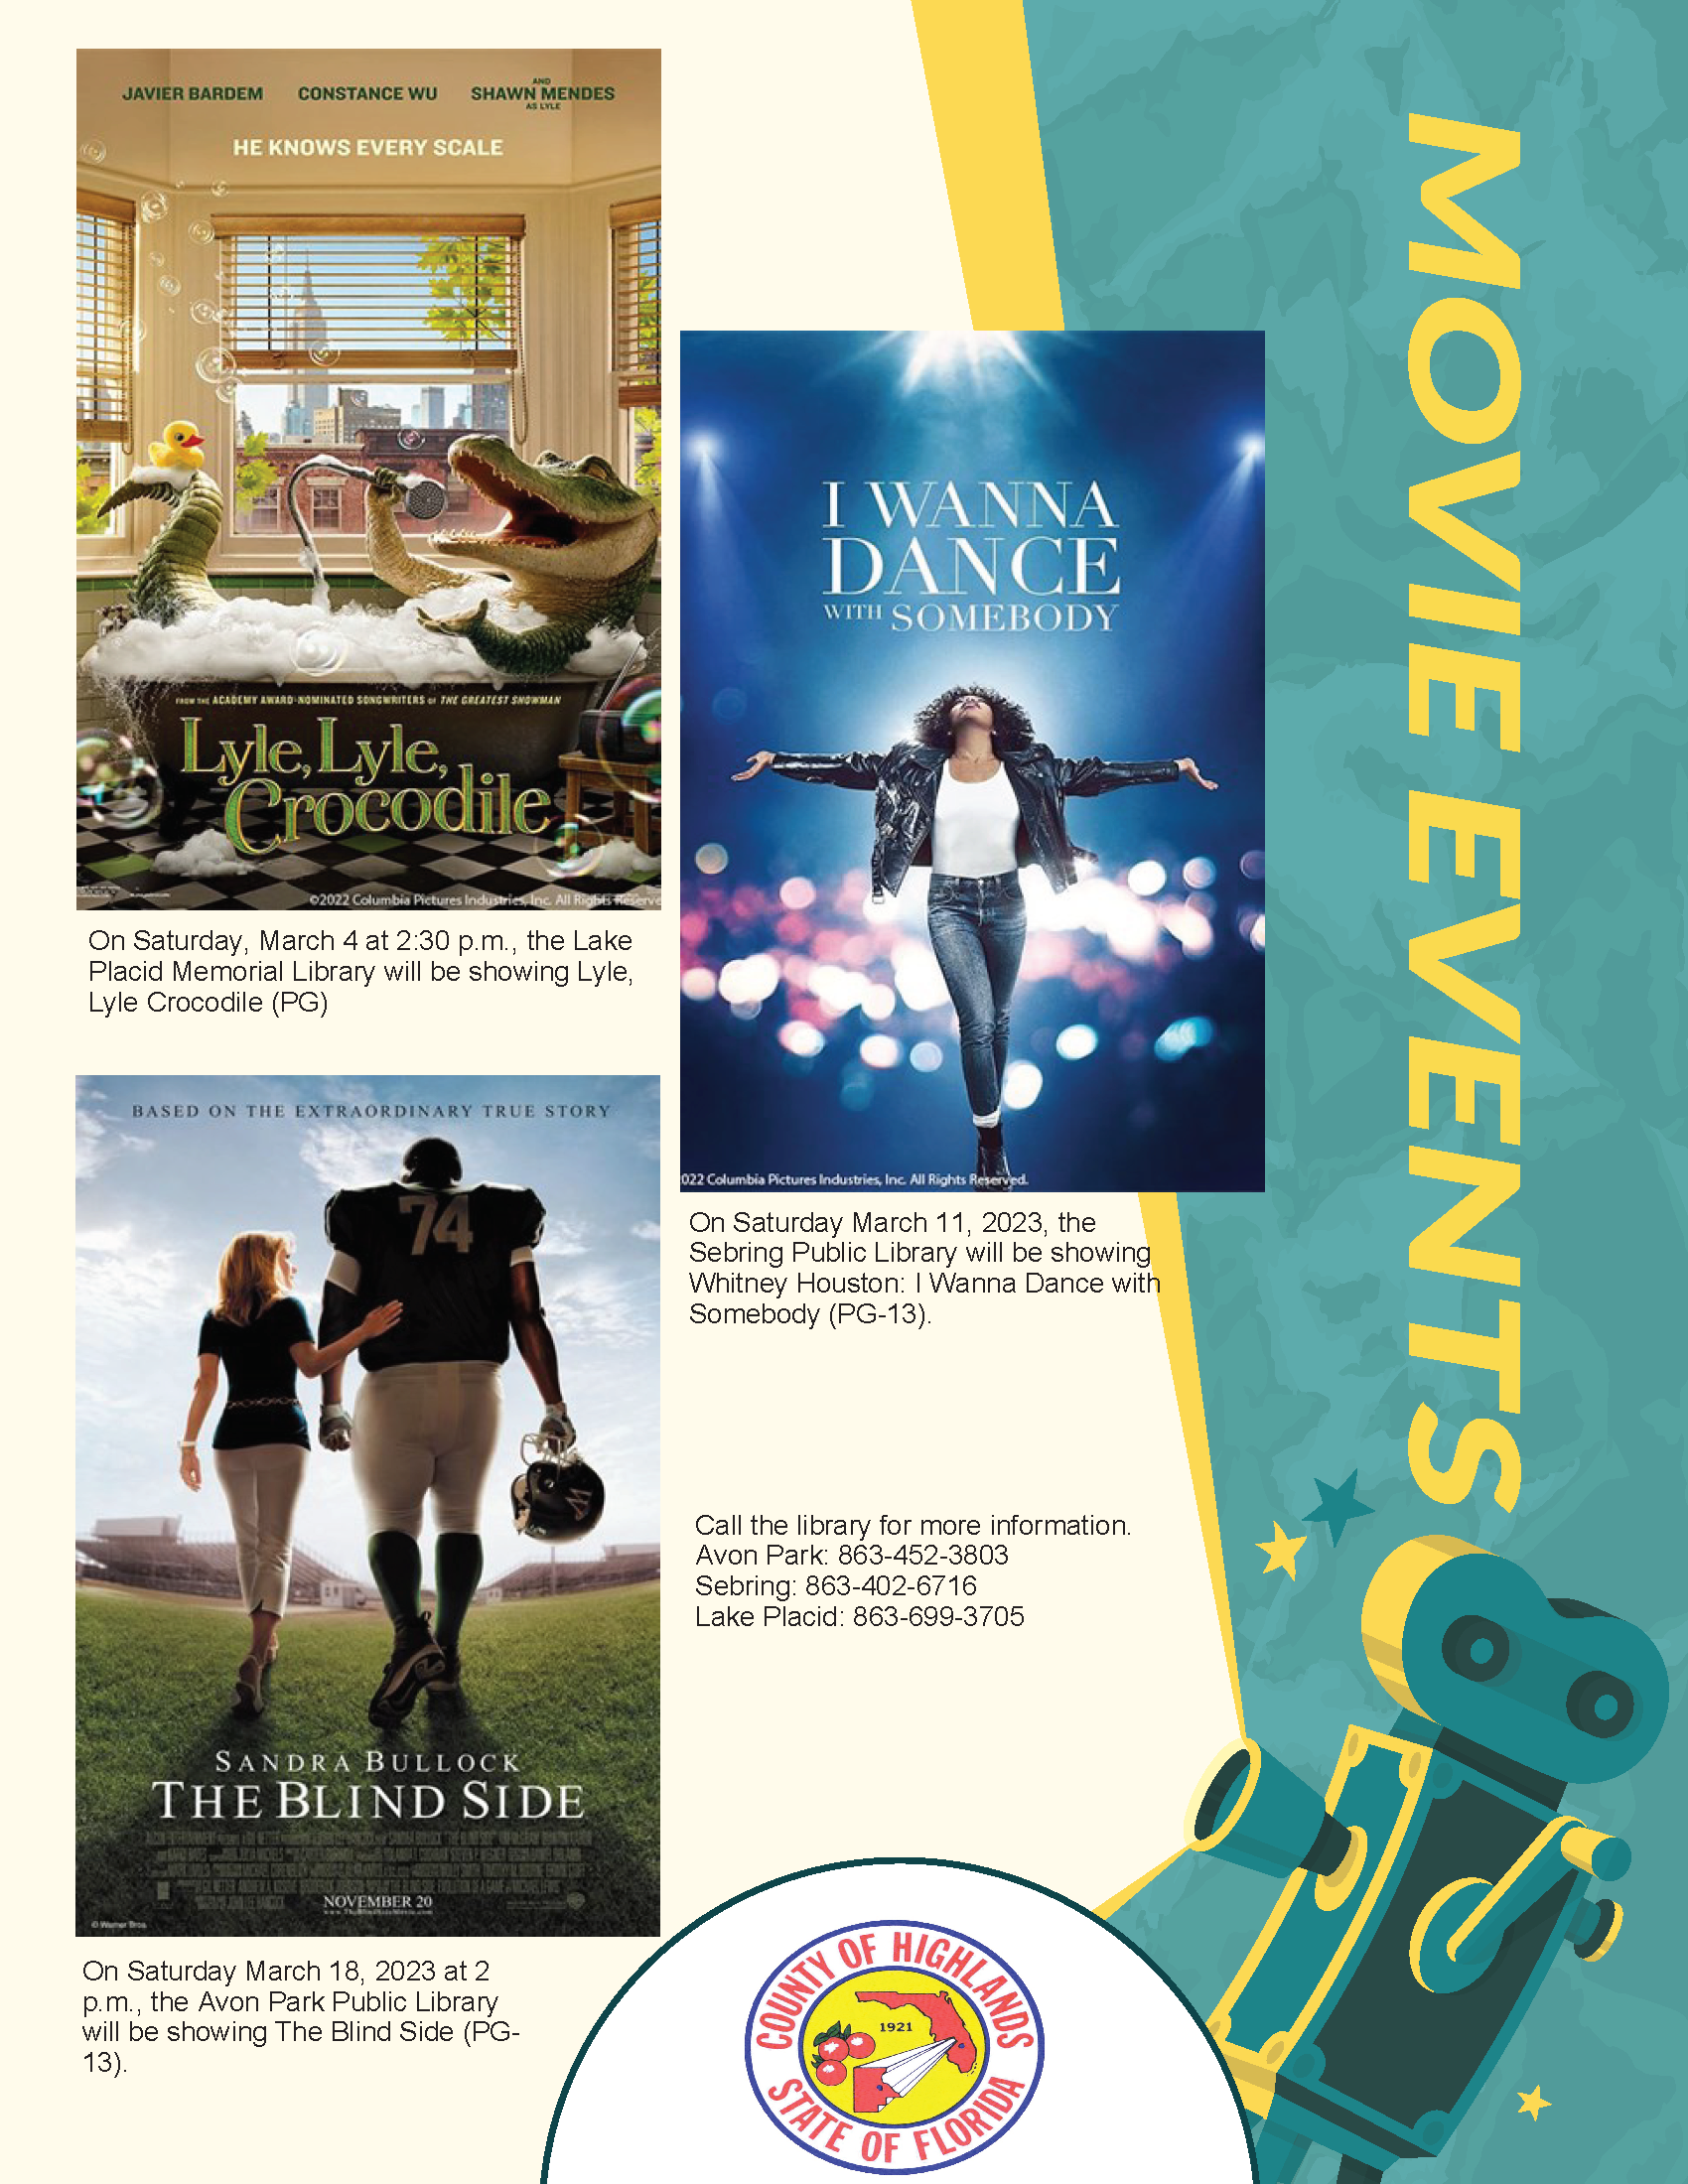 On March 4, 2023 at 2:30 p.m., the Lake Placid Memorial Library will host a movie showing of Lyle, Lyle Crocodile.  On Saturday, March 11, 2023 at 6 p.m., the Sebring library will be showing a movie titled, I Wanna Dance with Somebody.  On Saturday, March 18, 2023 at 2 p.m., the Avon Park Public Library will host a movie showing of The Blind Side.